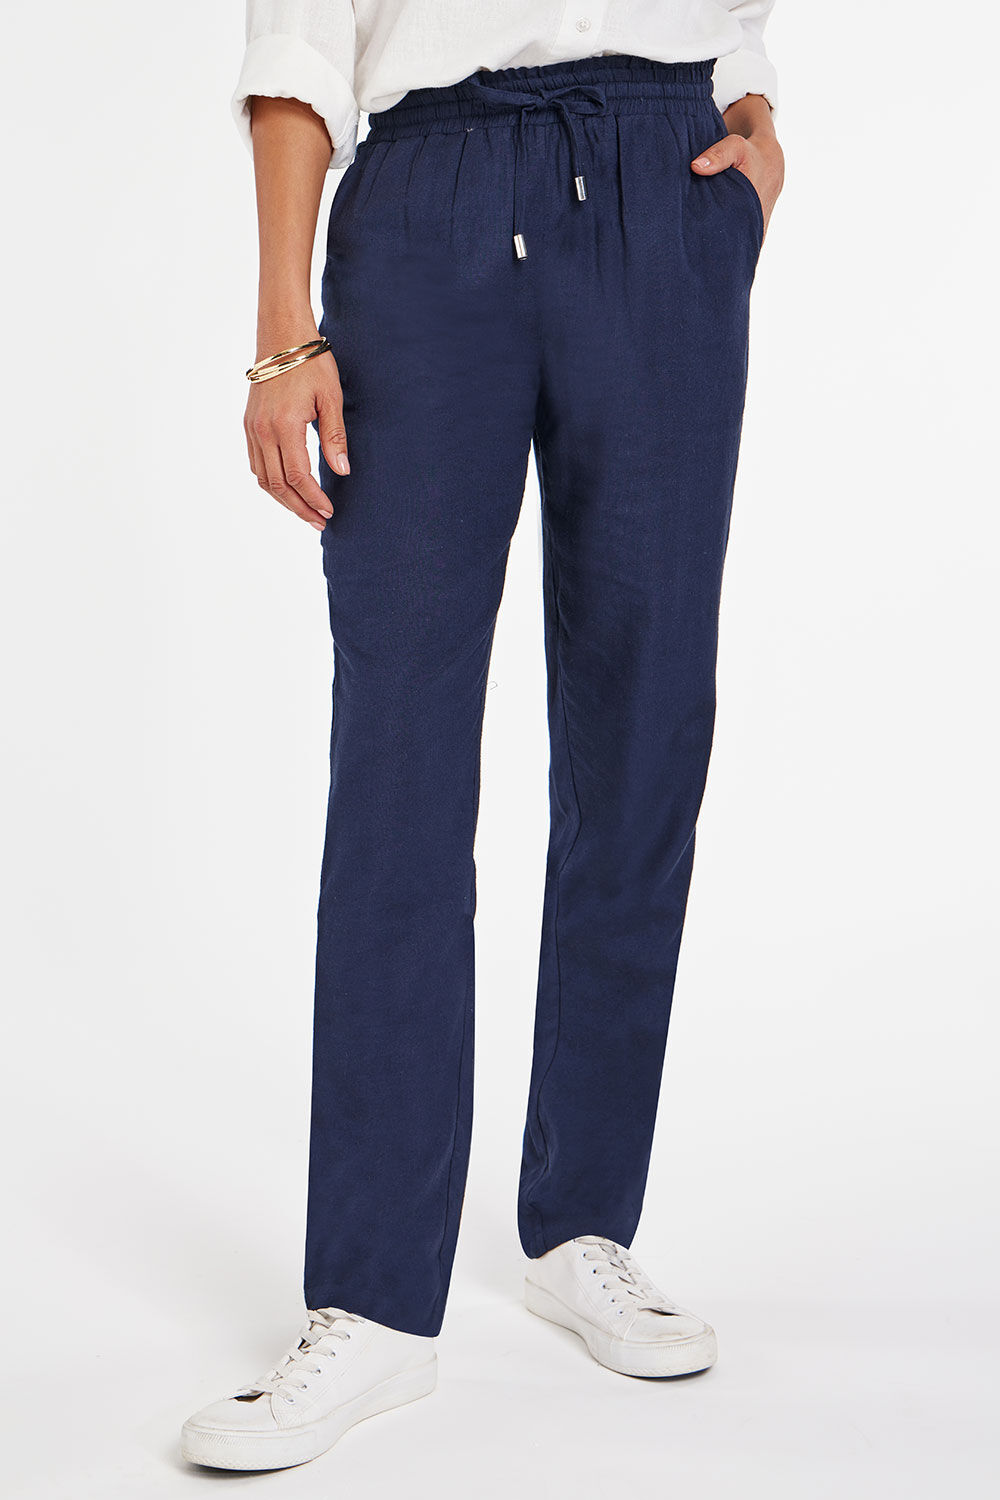 Bonmarche Navy Paperbag Tie Waist Tapered Linen Trousers, Size: 10 - Summer Trousers